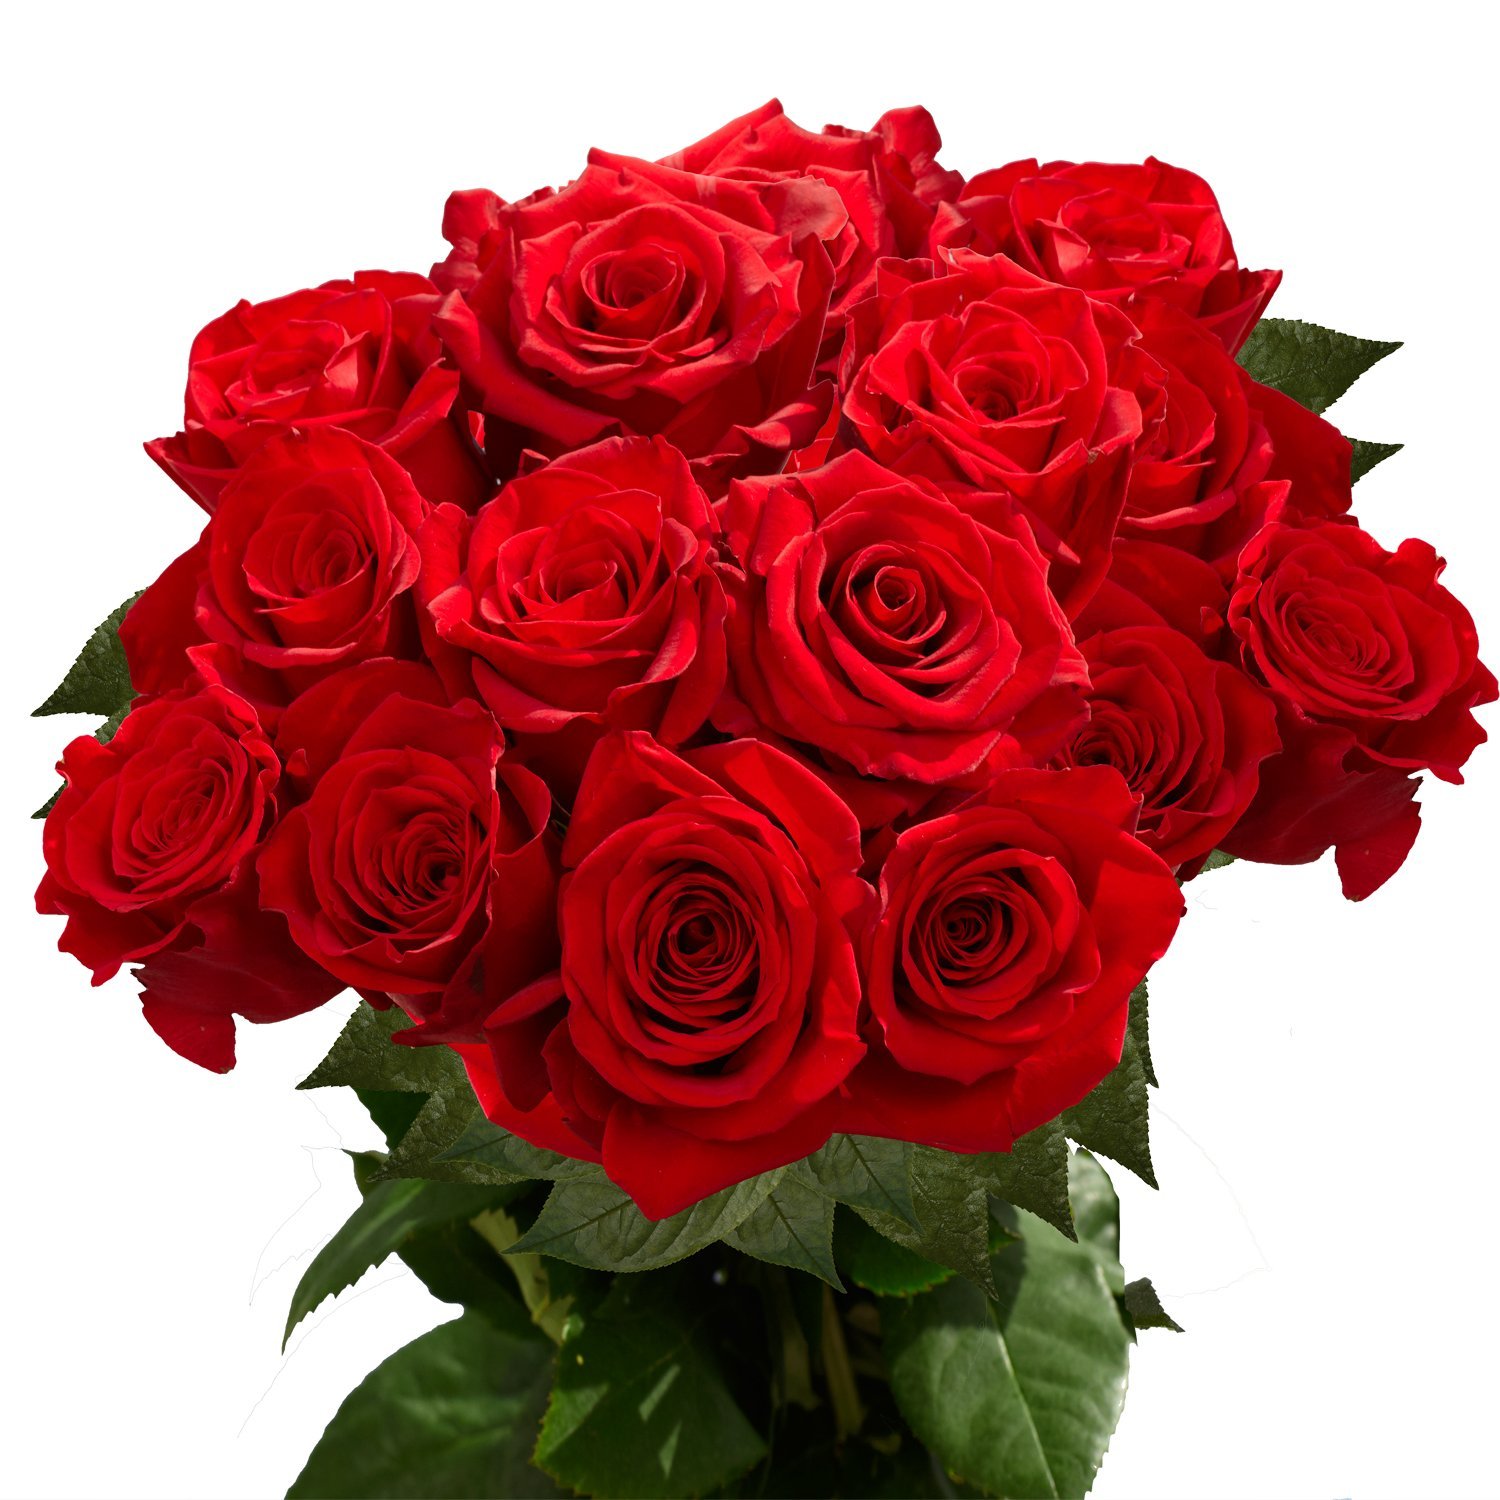 Amazon.com : GlobalRose 50 Fresh Long Stem Red Roses : Grocery ...